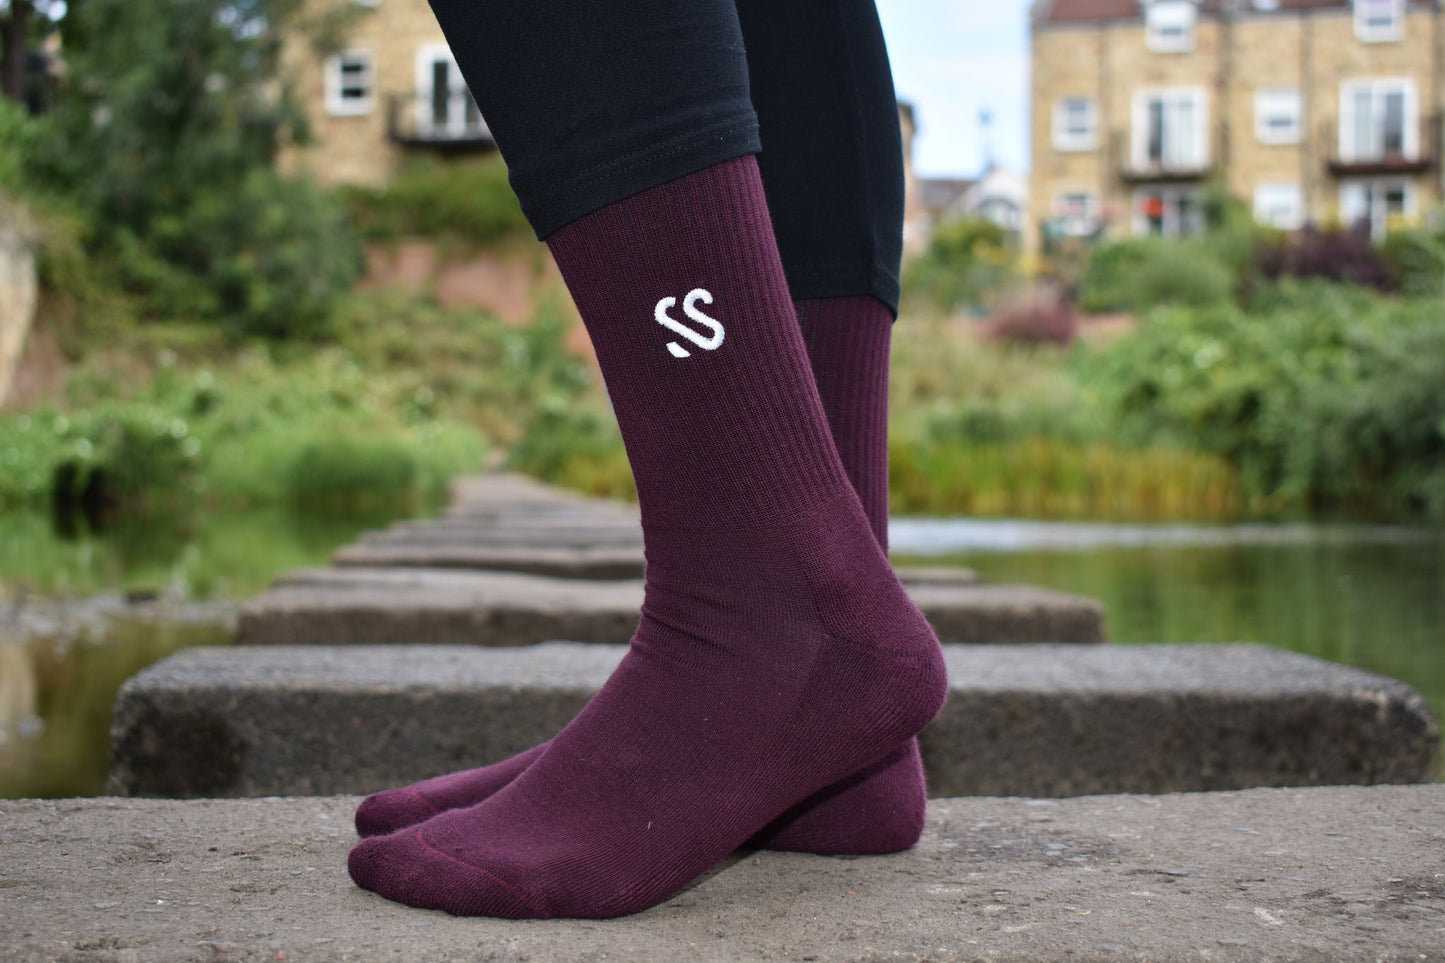 A pair of burgundy combed cotton socks being worn outside by a river